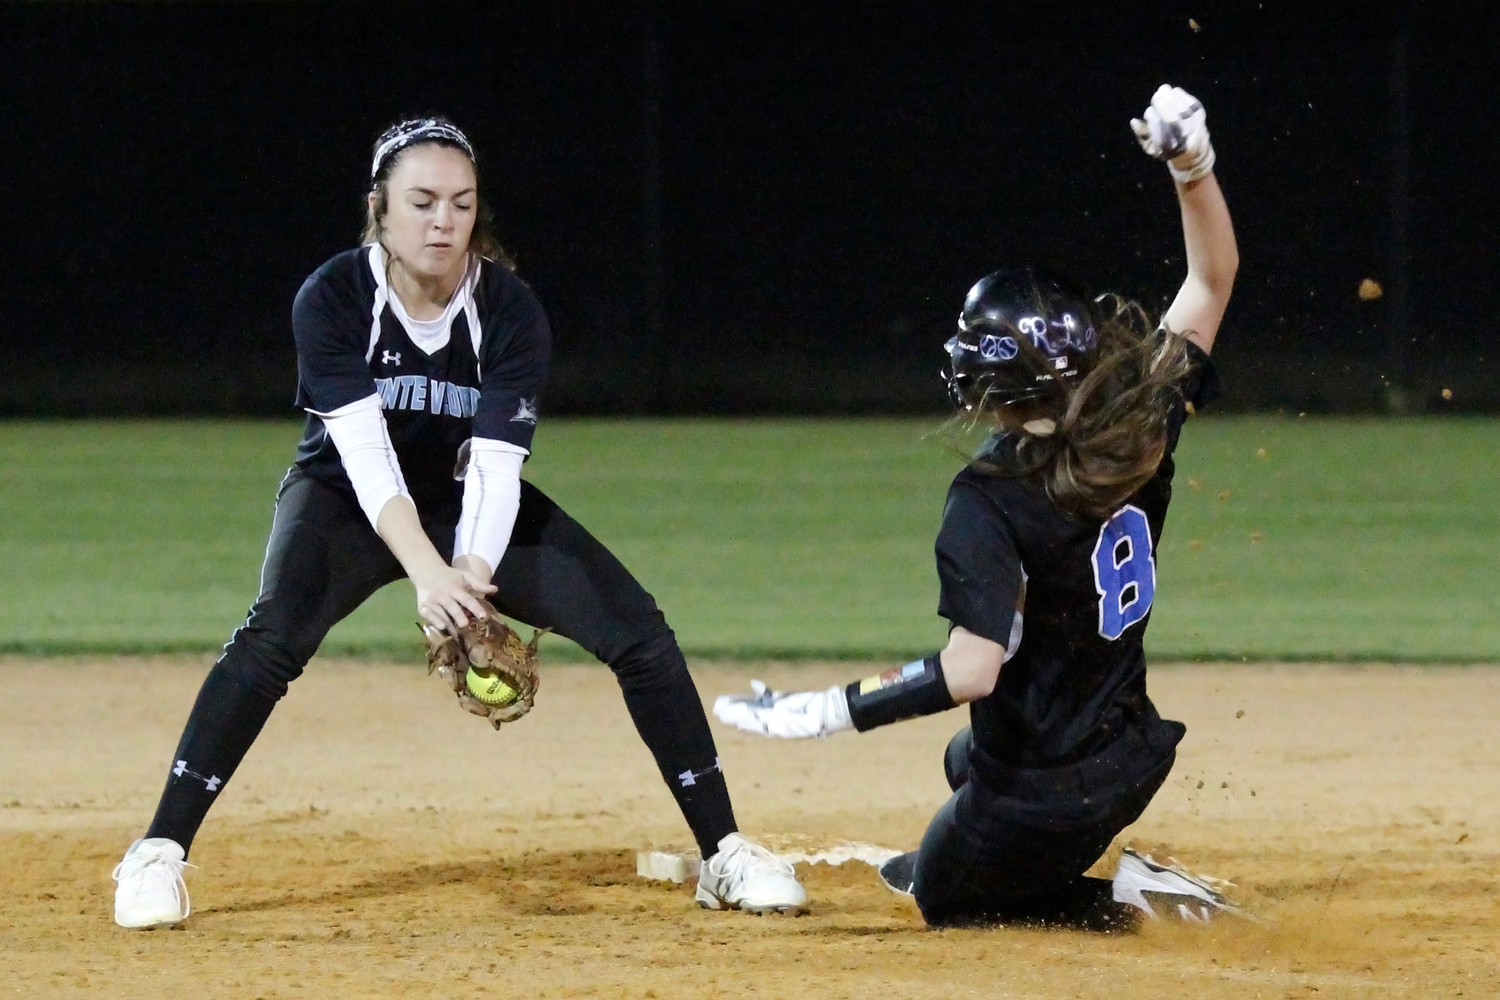 Sharks shortstop Michelle Leone takes the throw from catcher Audrey Matt 
before applying the tag to catch the runner stealing.